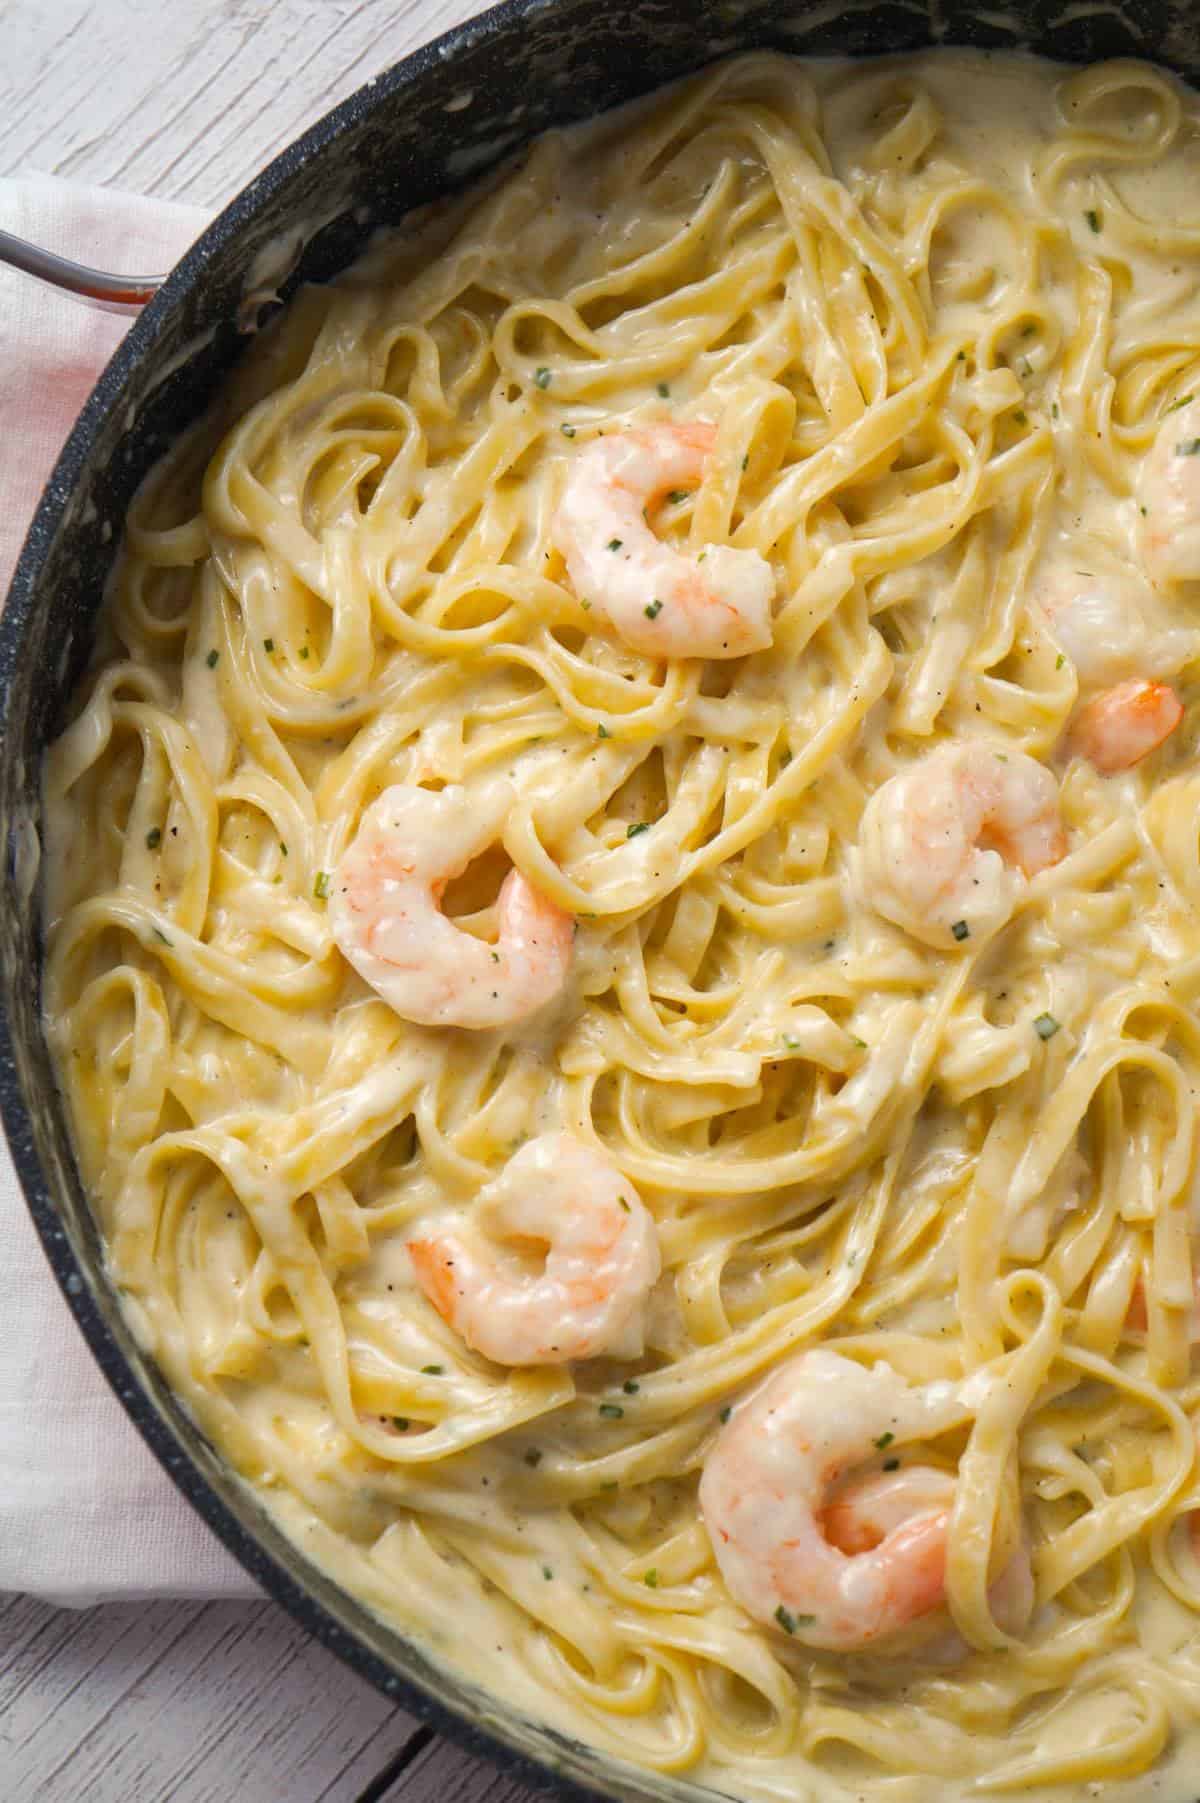 Fettuccine Alfredo with Shrimp is a delicious seafood pasta recipe with a creamy garlic parmesan sauce.